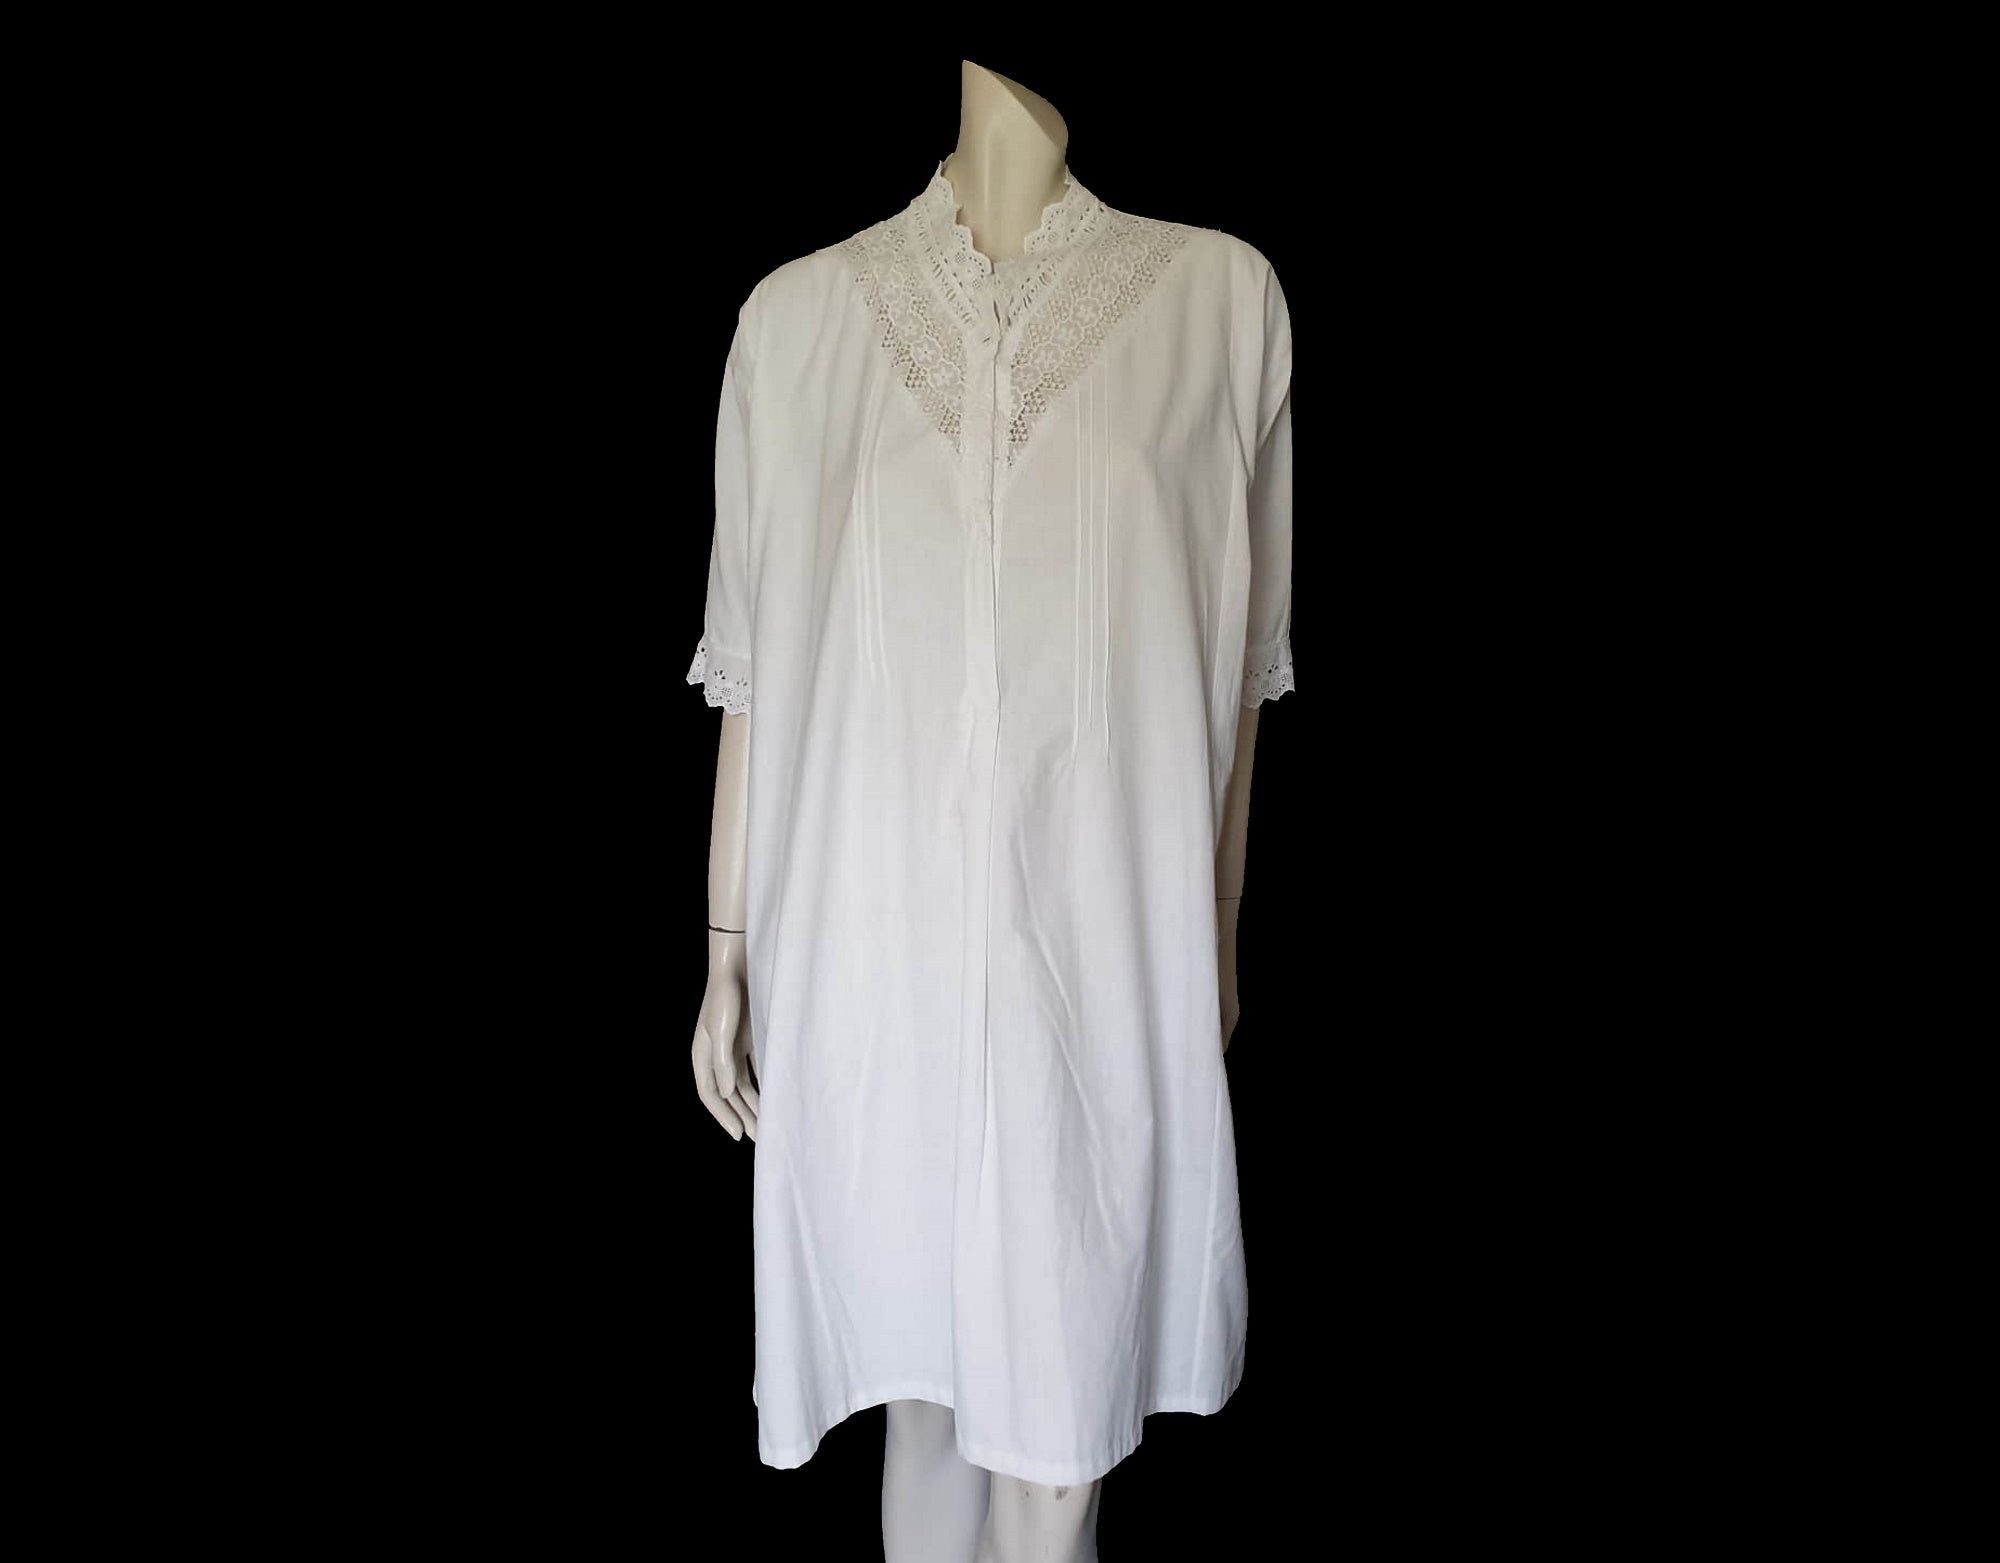 Antique, 1920s White Nightgown, Dress, With Broderie Anglaise - M